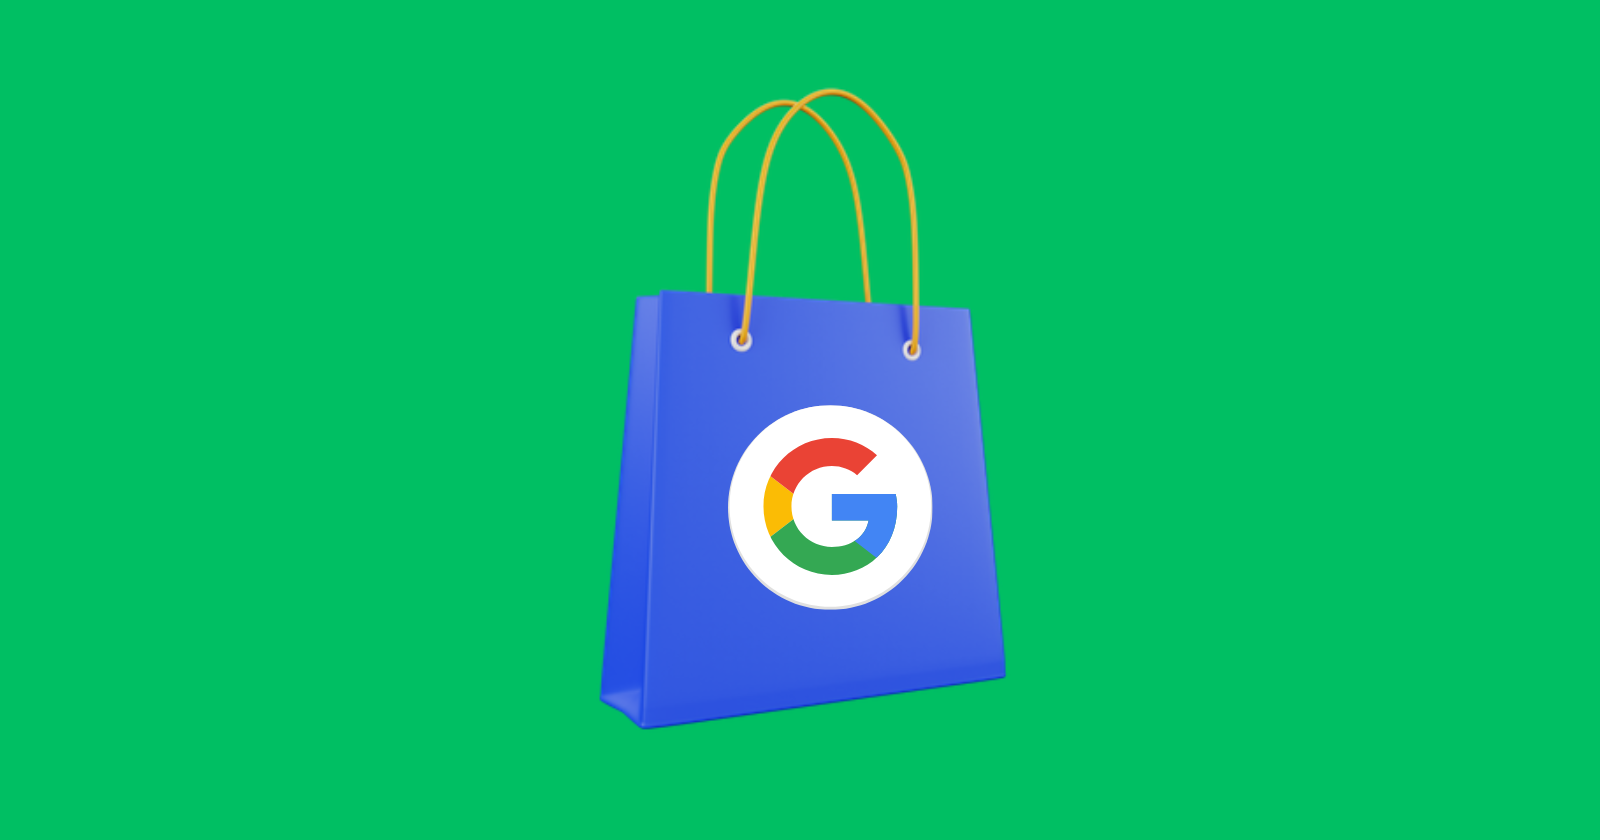 Check out all the best offers that Google Store in Europe has to offer on Google Pixel devices